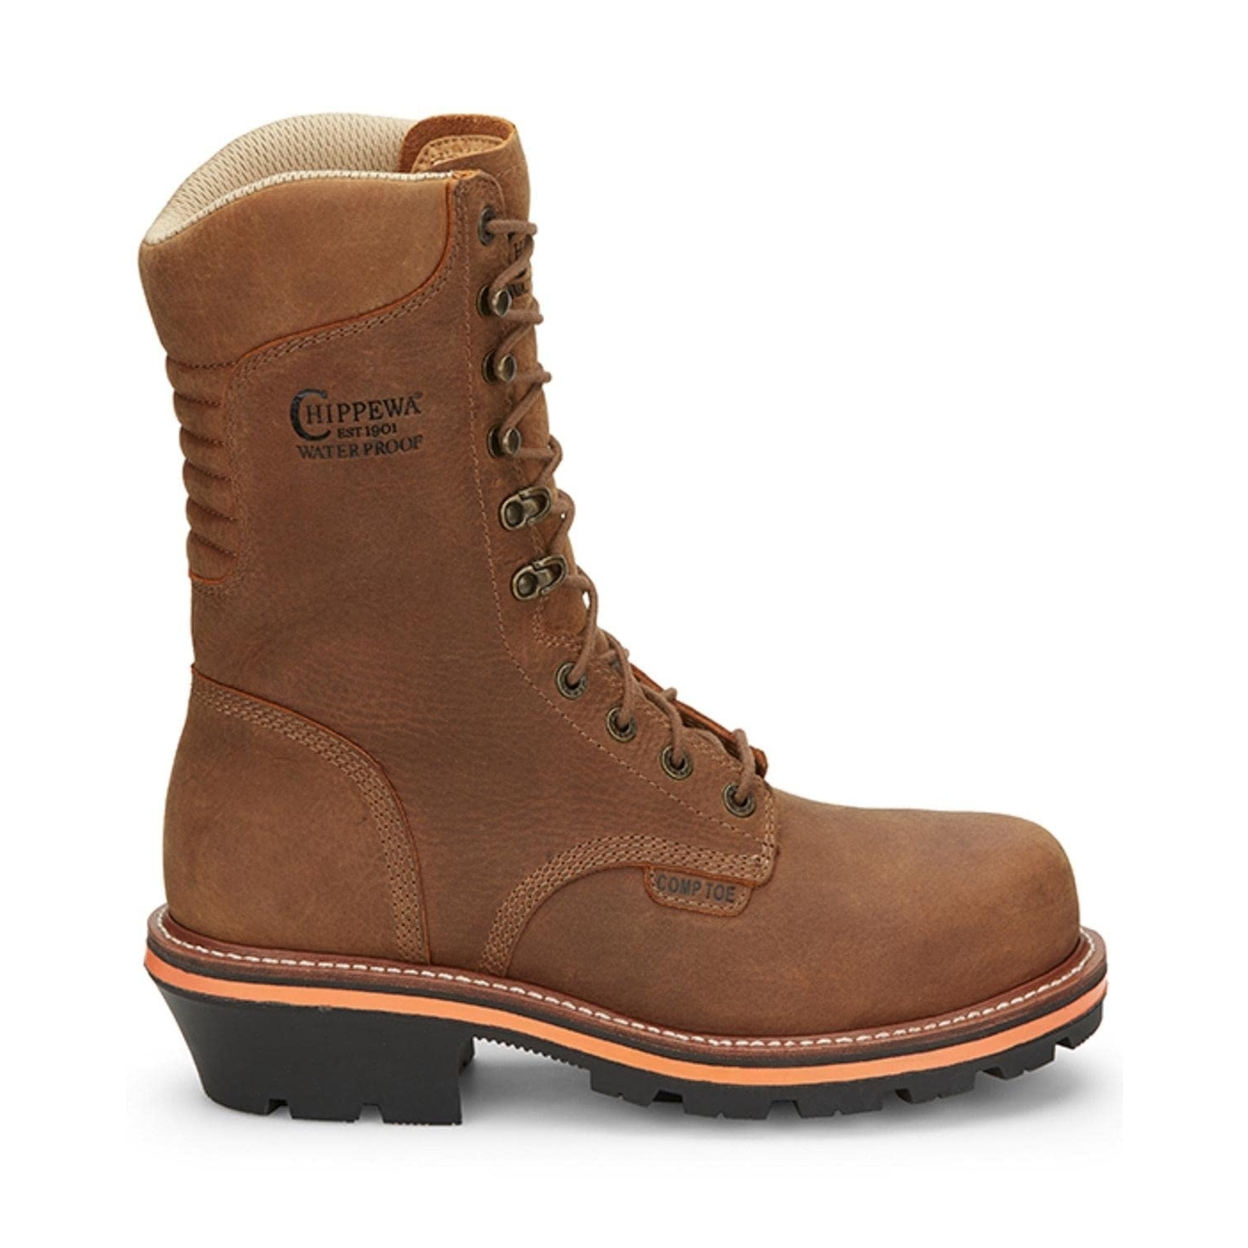 Chippewa Men's 10 Thunderstruck Logger Waterproof Composite Toe Insulated Lace-Up Work Boot Brown - TH1030 ONE SIZE TAN - TAN, 9.5 Wide